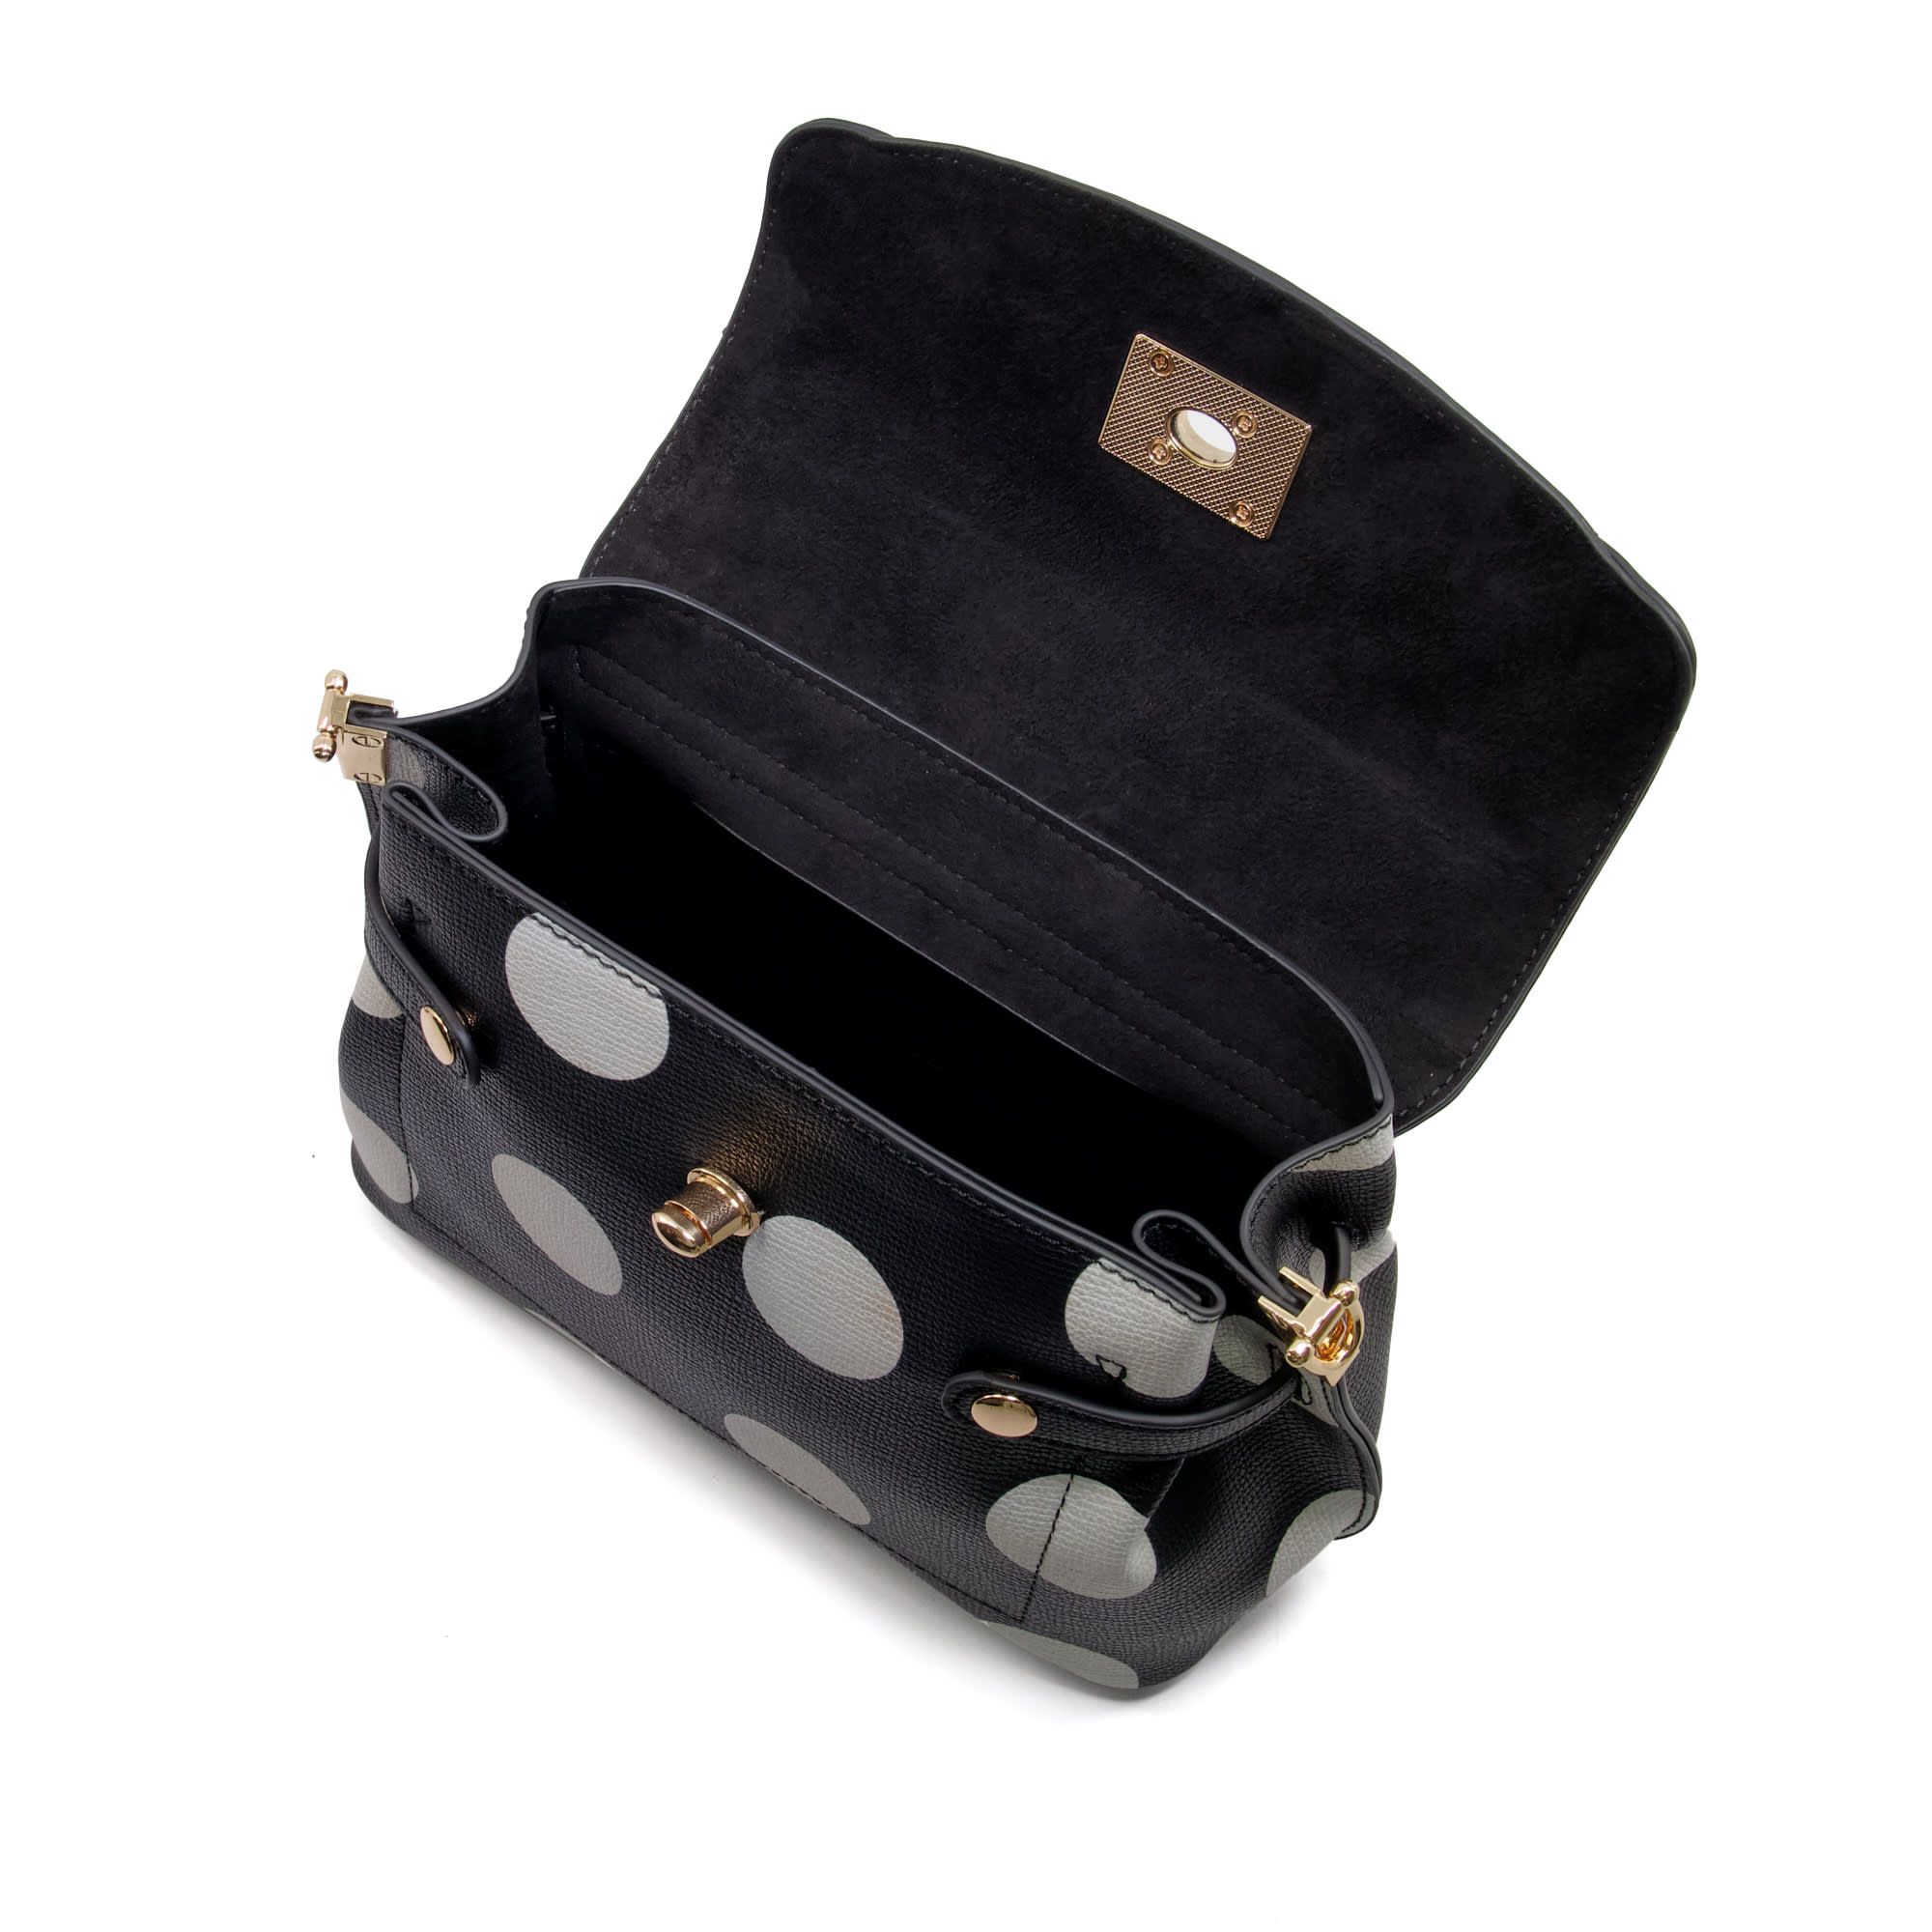 A timeless take on the polka-dot trend, this cross-body style has a classic monochrome pattern. Luxurious and feminine, it's designed with gold hardware, a chic top handle and a slim, adjustable strap.